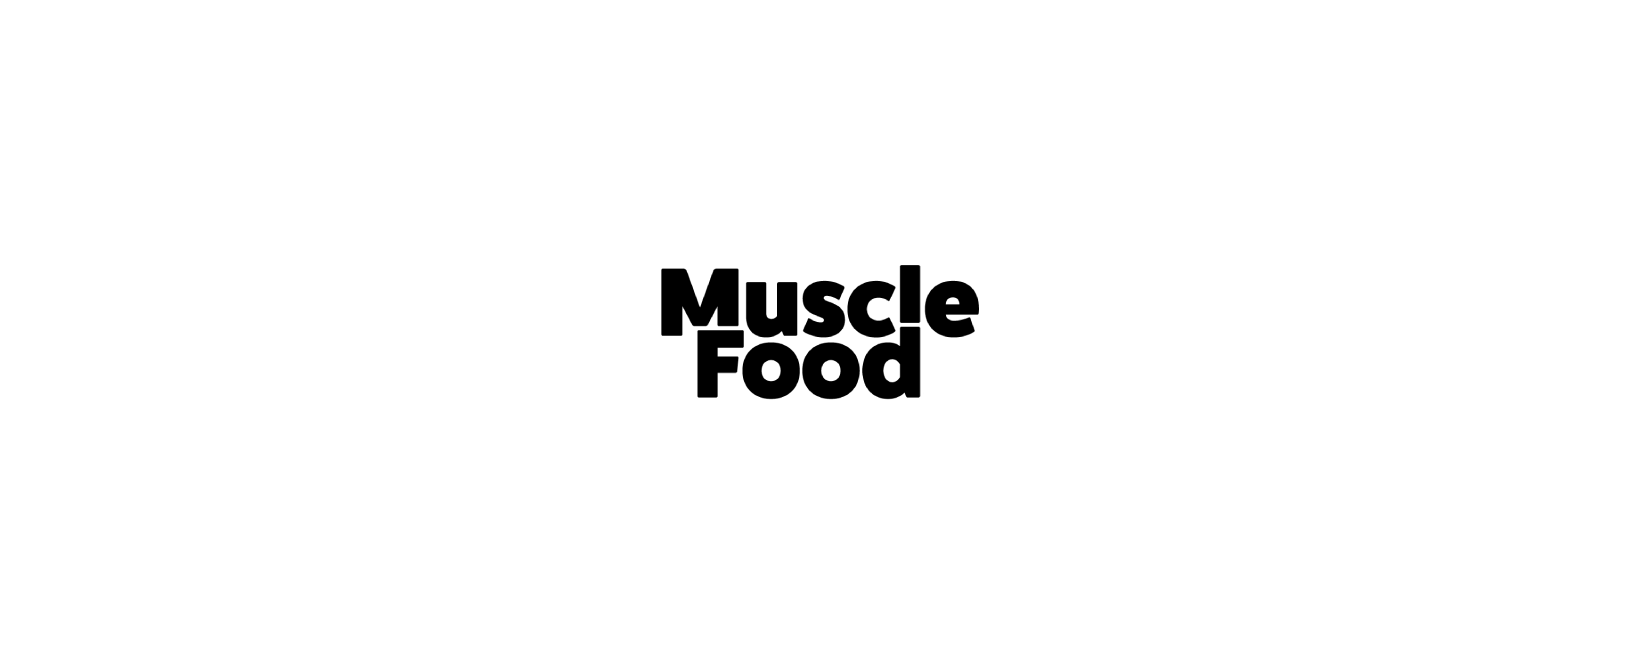 Muscle Food Review – Healthy Discounts, Healthy You!